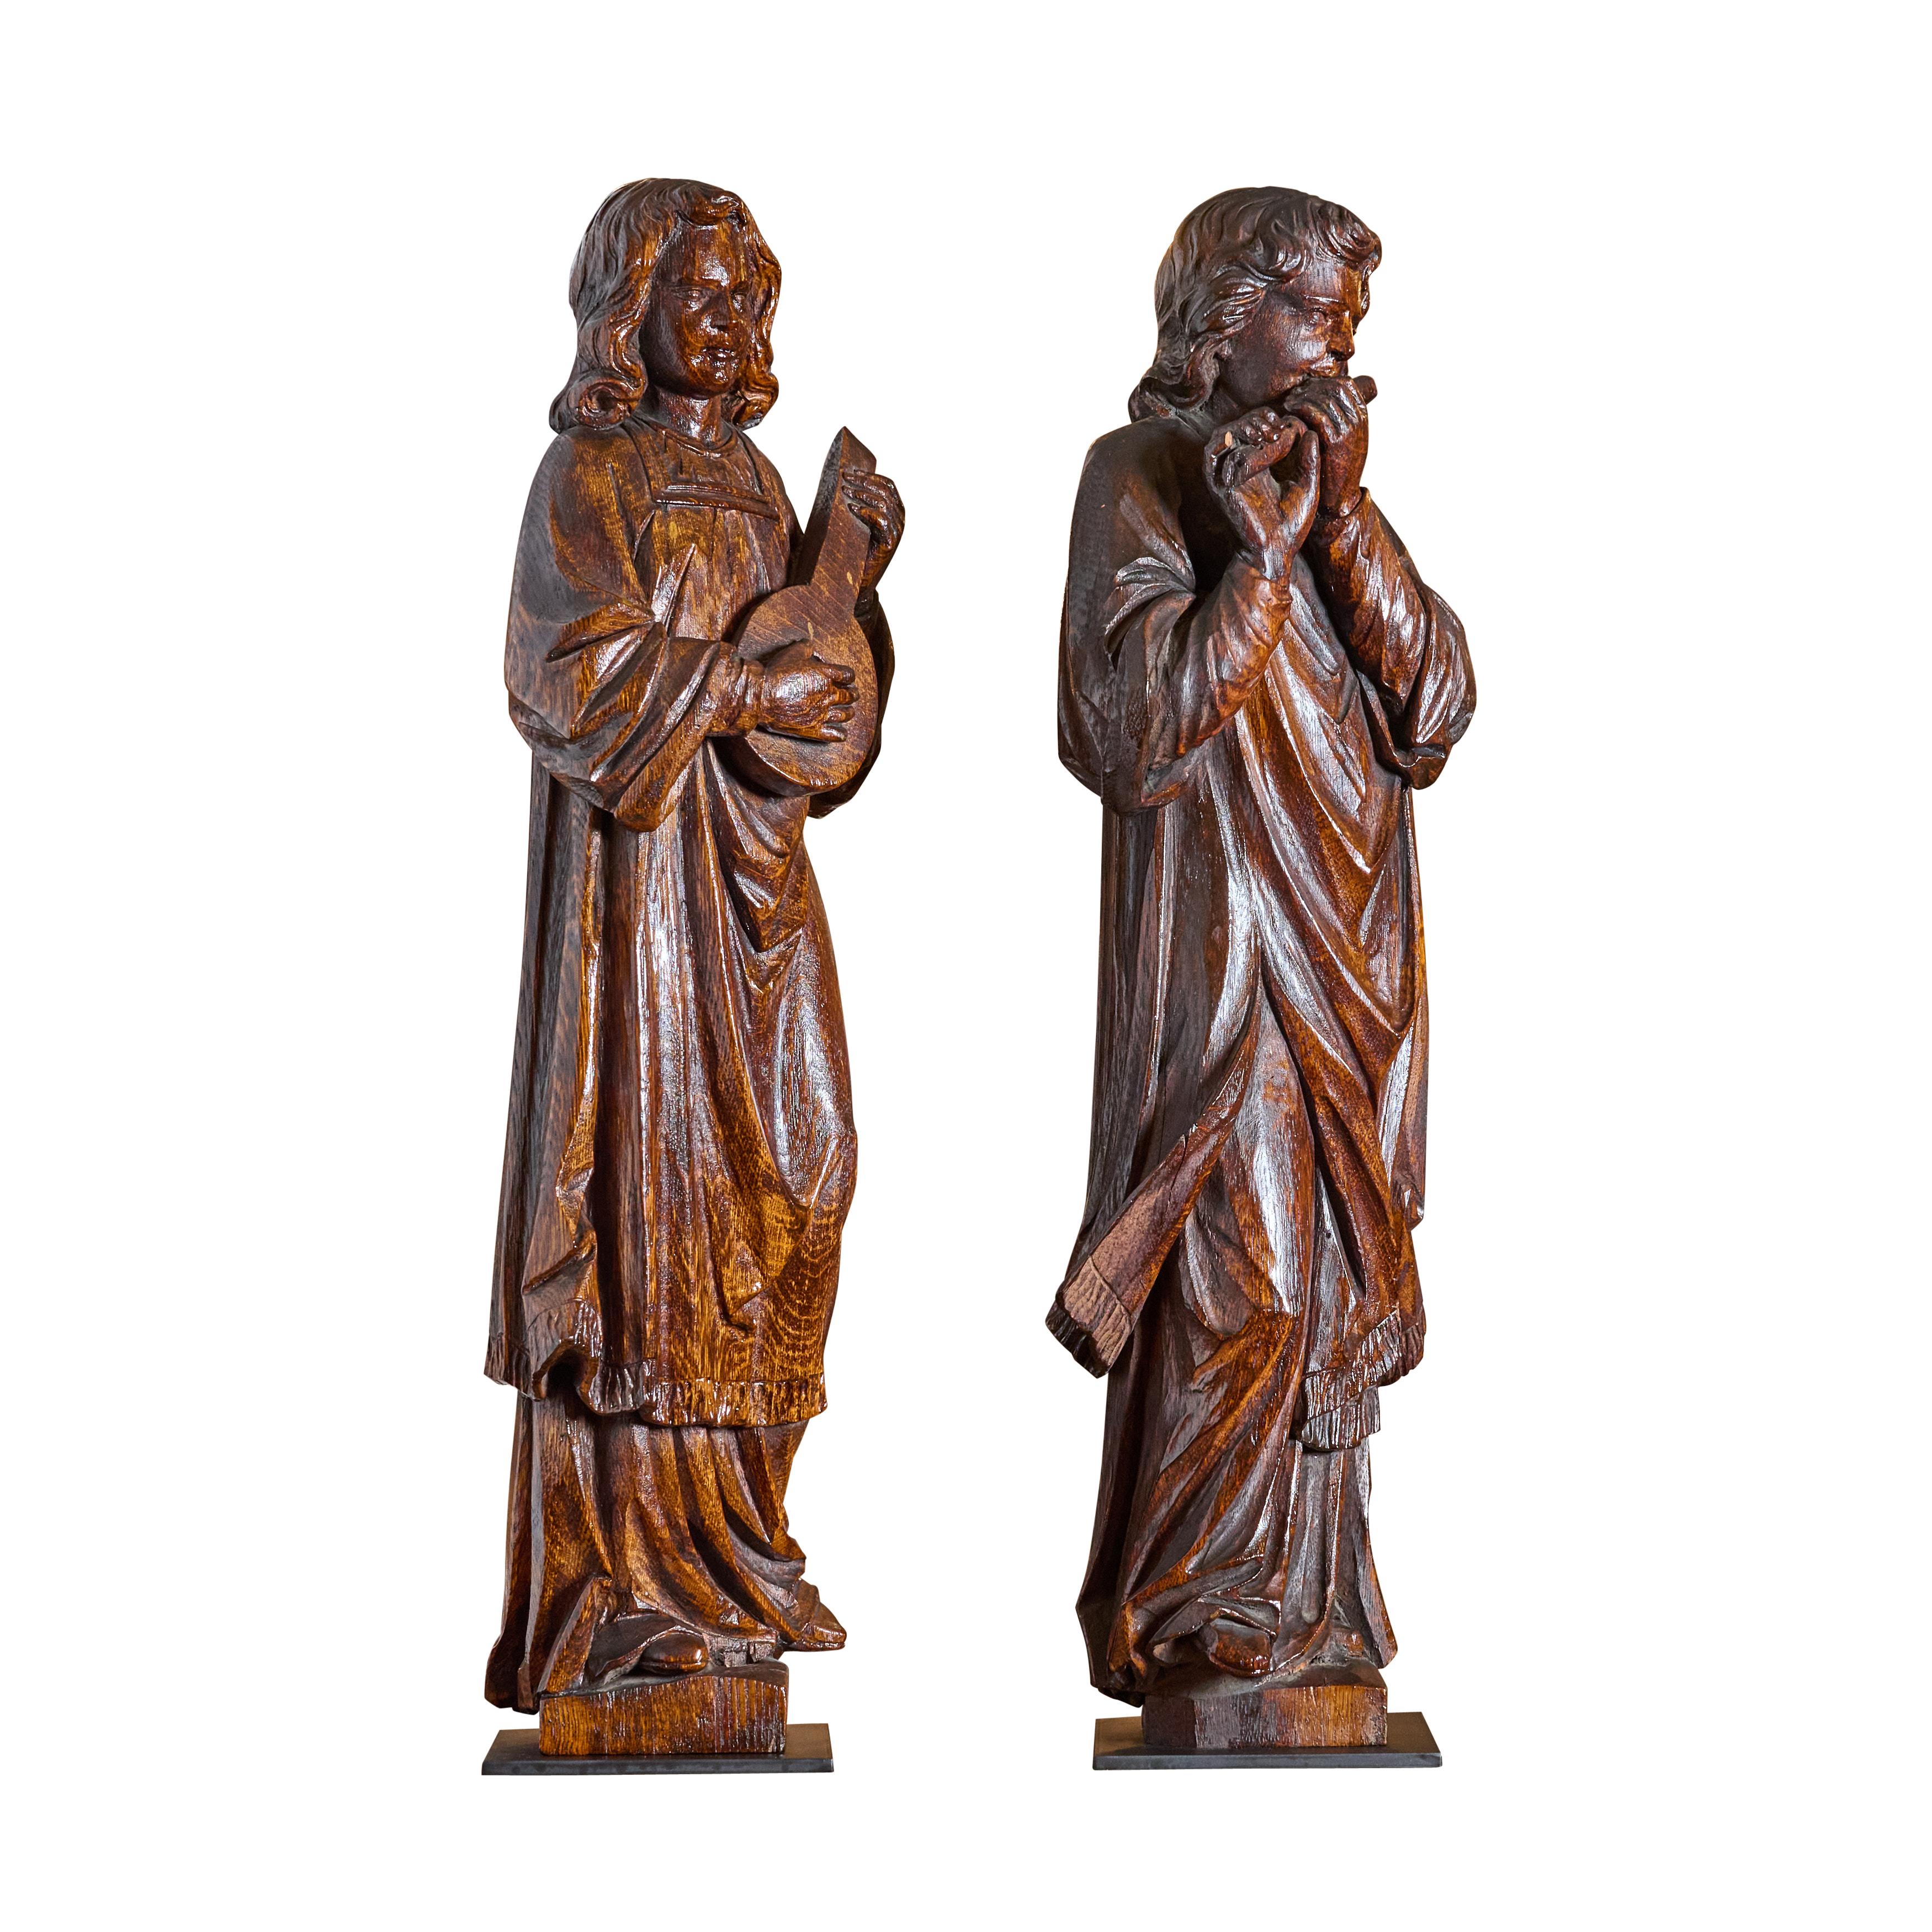 Pair of carved oak musicians. Includes new custom iron bases. Great quality.

